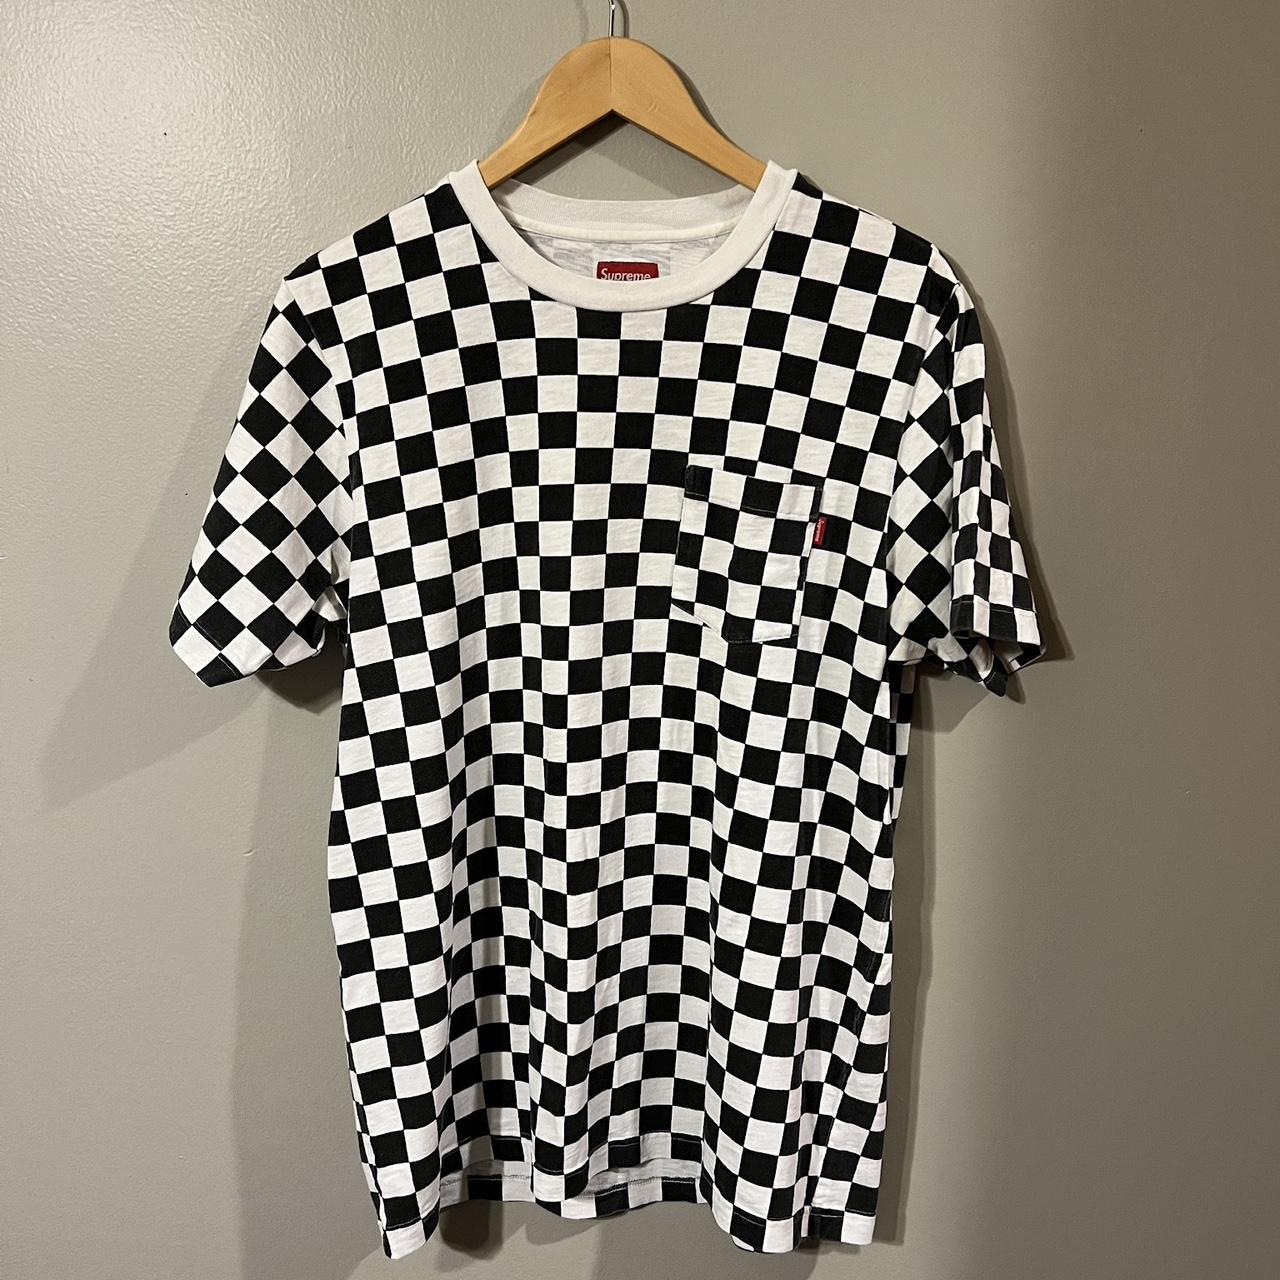 SUPREME CHECKERED POCKET TEE!! READY TO SHIP!! GREAT...